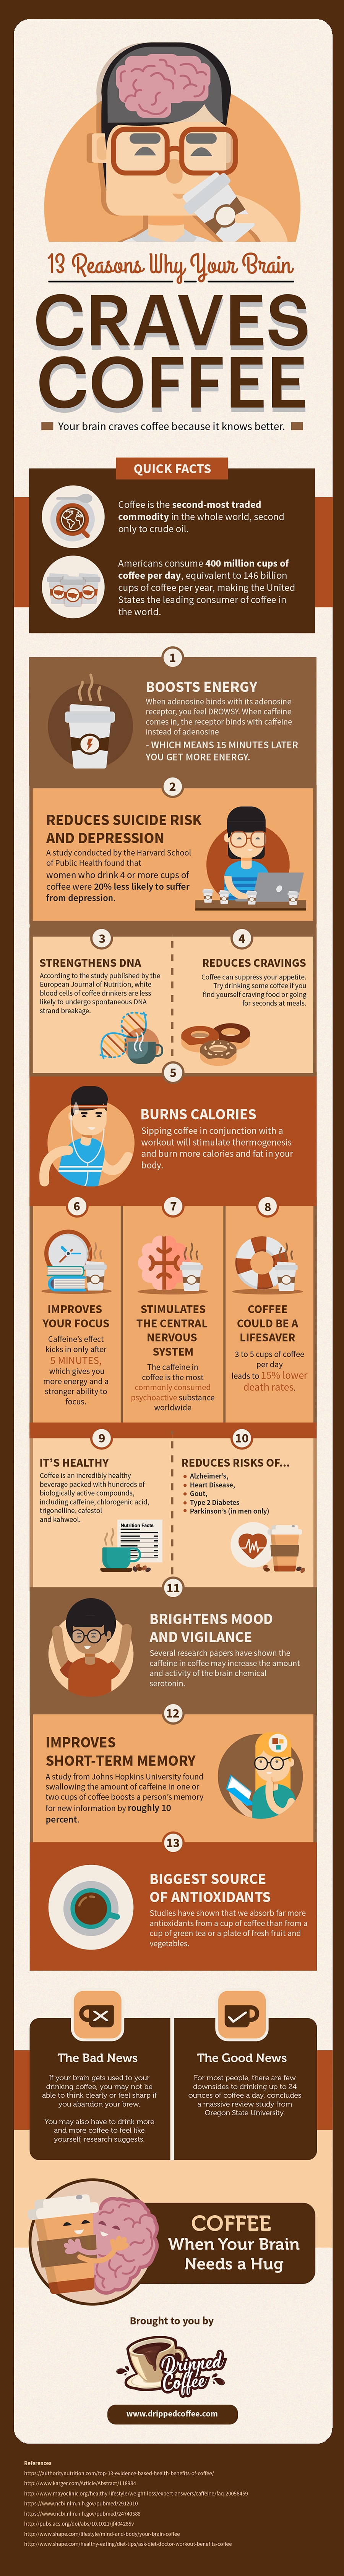 13 Reasons Why Your Brain Craves Coffee [Infographic]